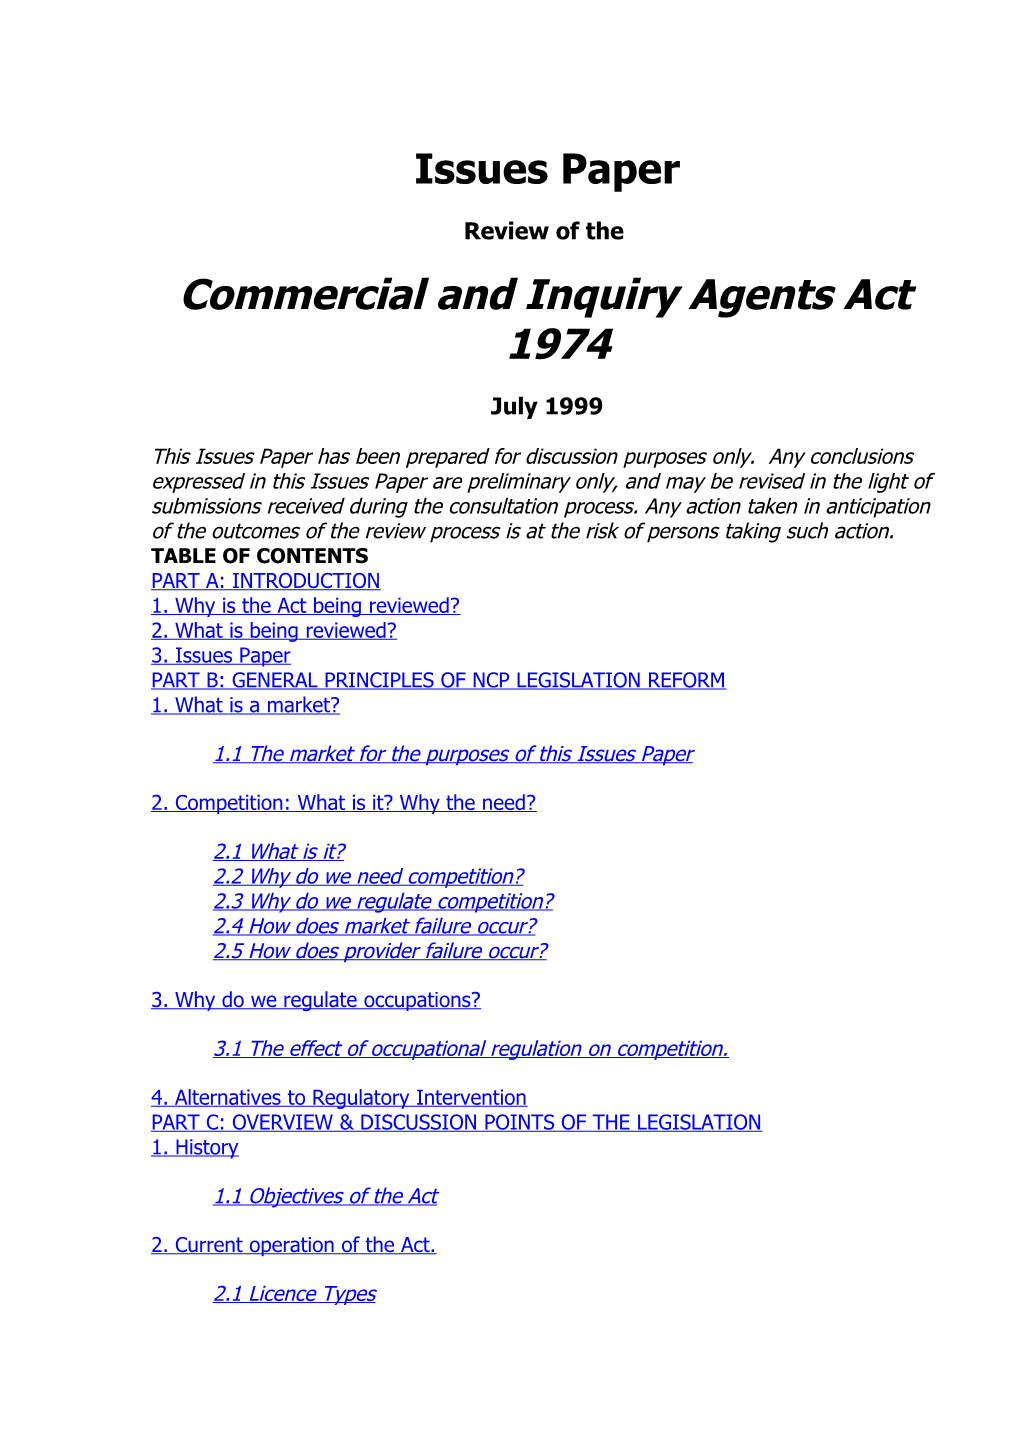 Commercial and Inquiry Agents Act 1974